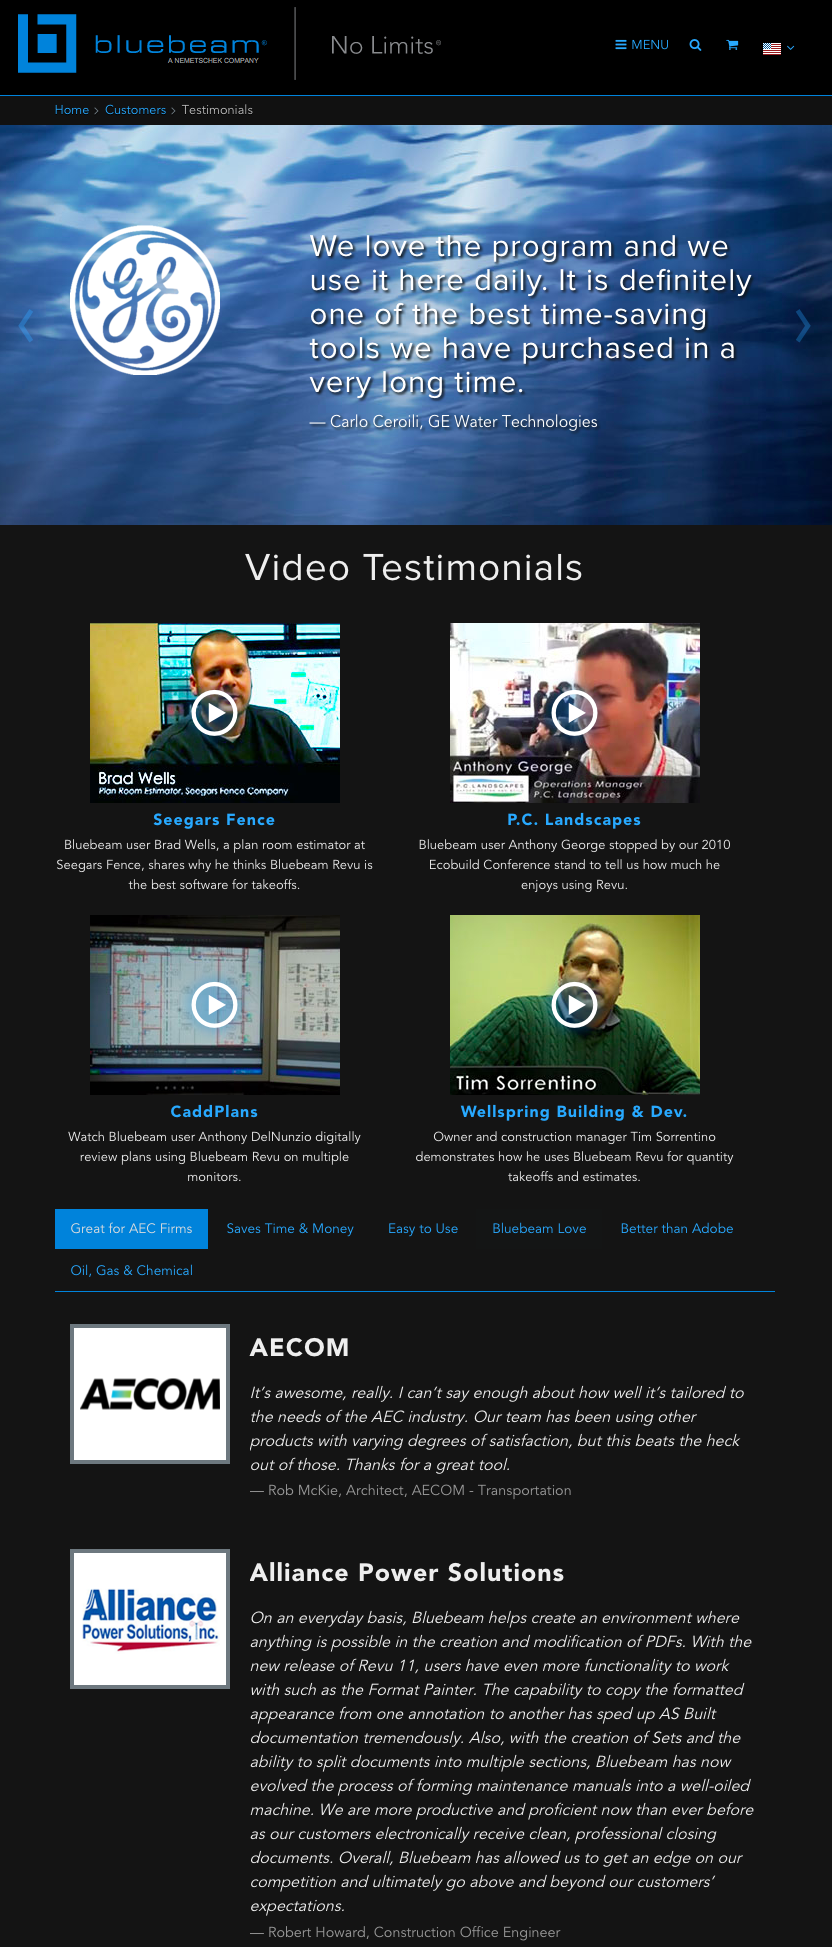 bluebeam-testimonials-page.png?noresize